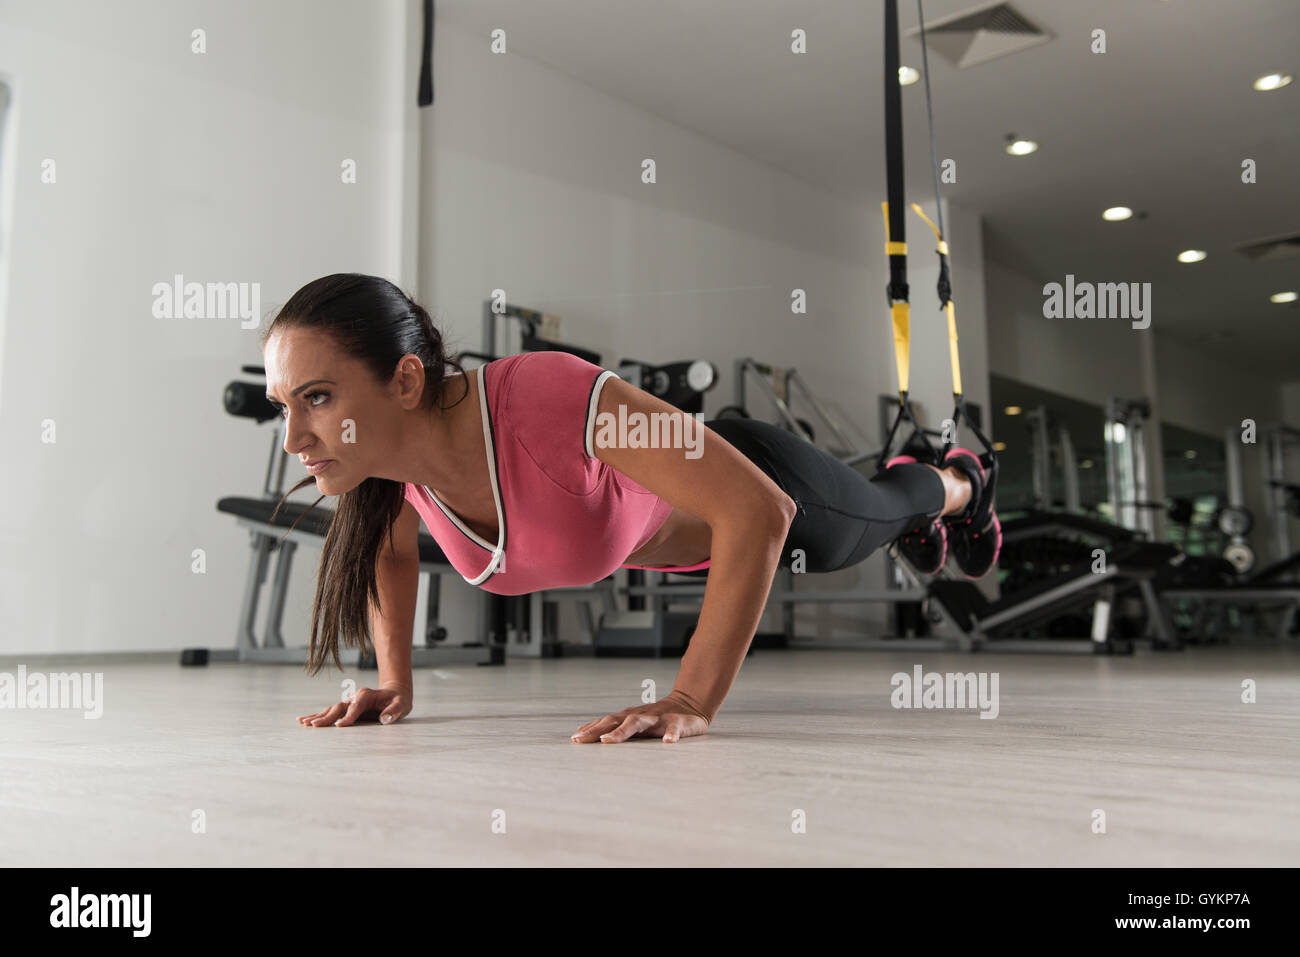 Attractive Woman Does Crossfit With Trx Fitness Straps In The Gym's Studio Stock Photo